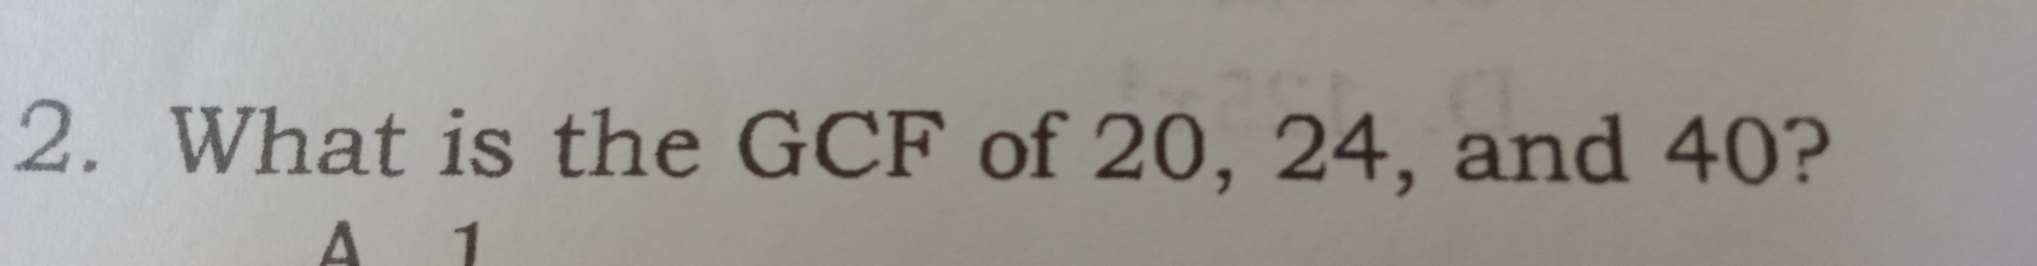 2. What is the GCF of 20, 24, and 40? a 1